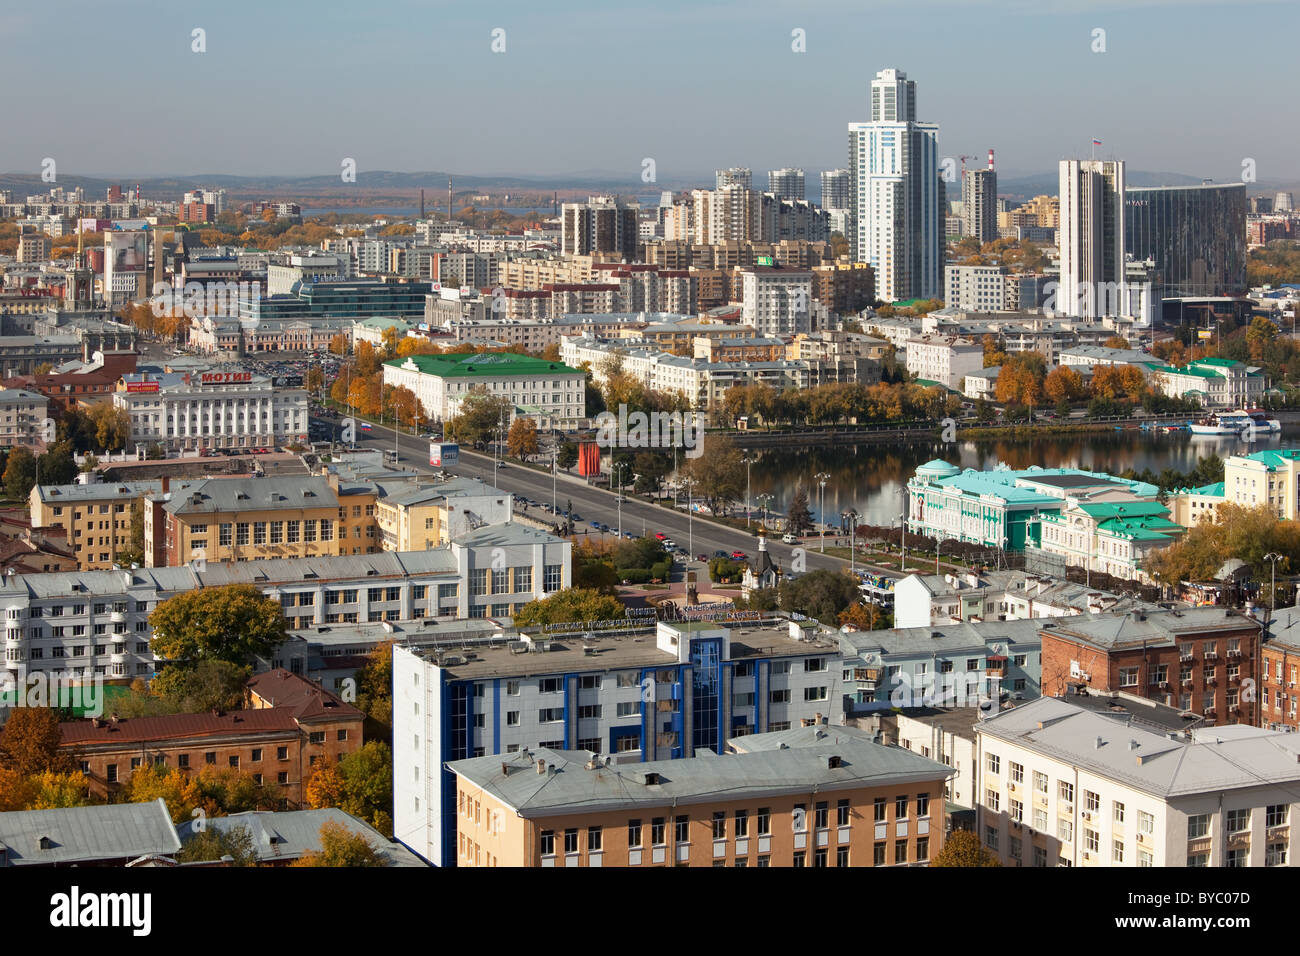 Ekaterinburg - central historical part of the city, Urals, Russia Stock Photo